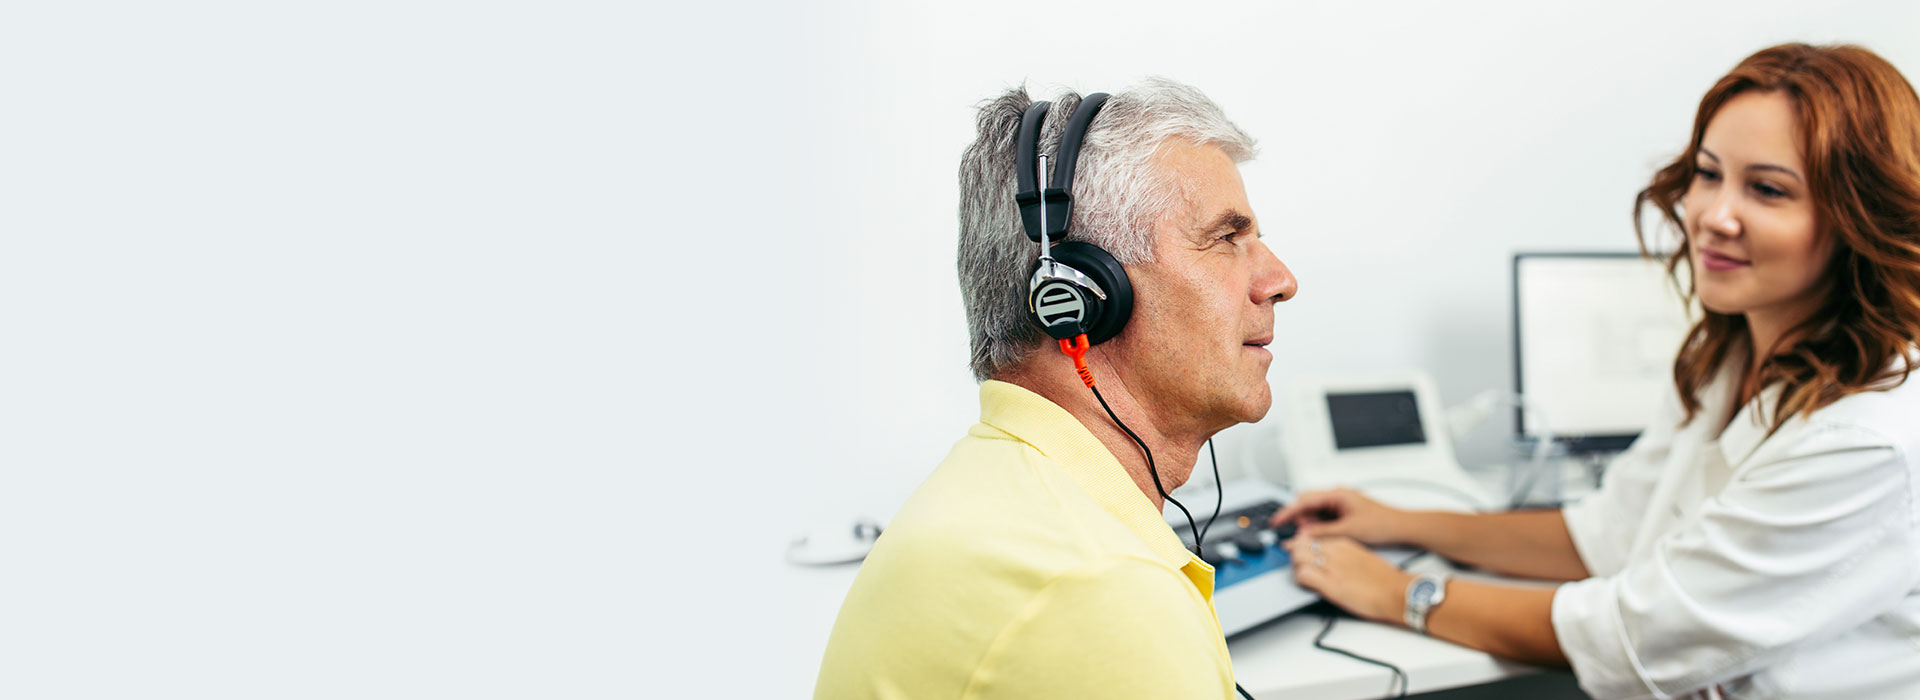 man hearing test and audiologist